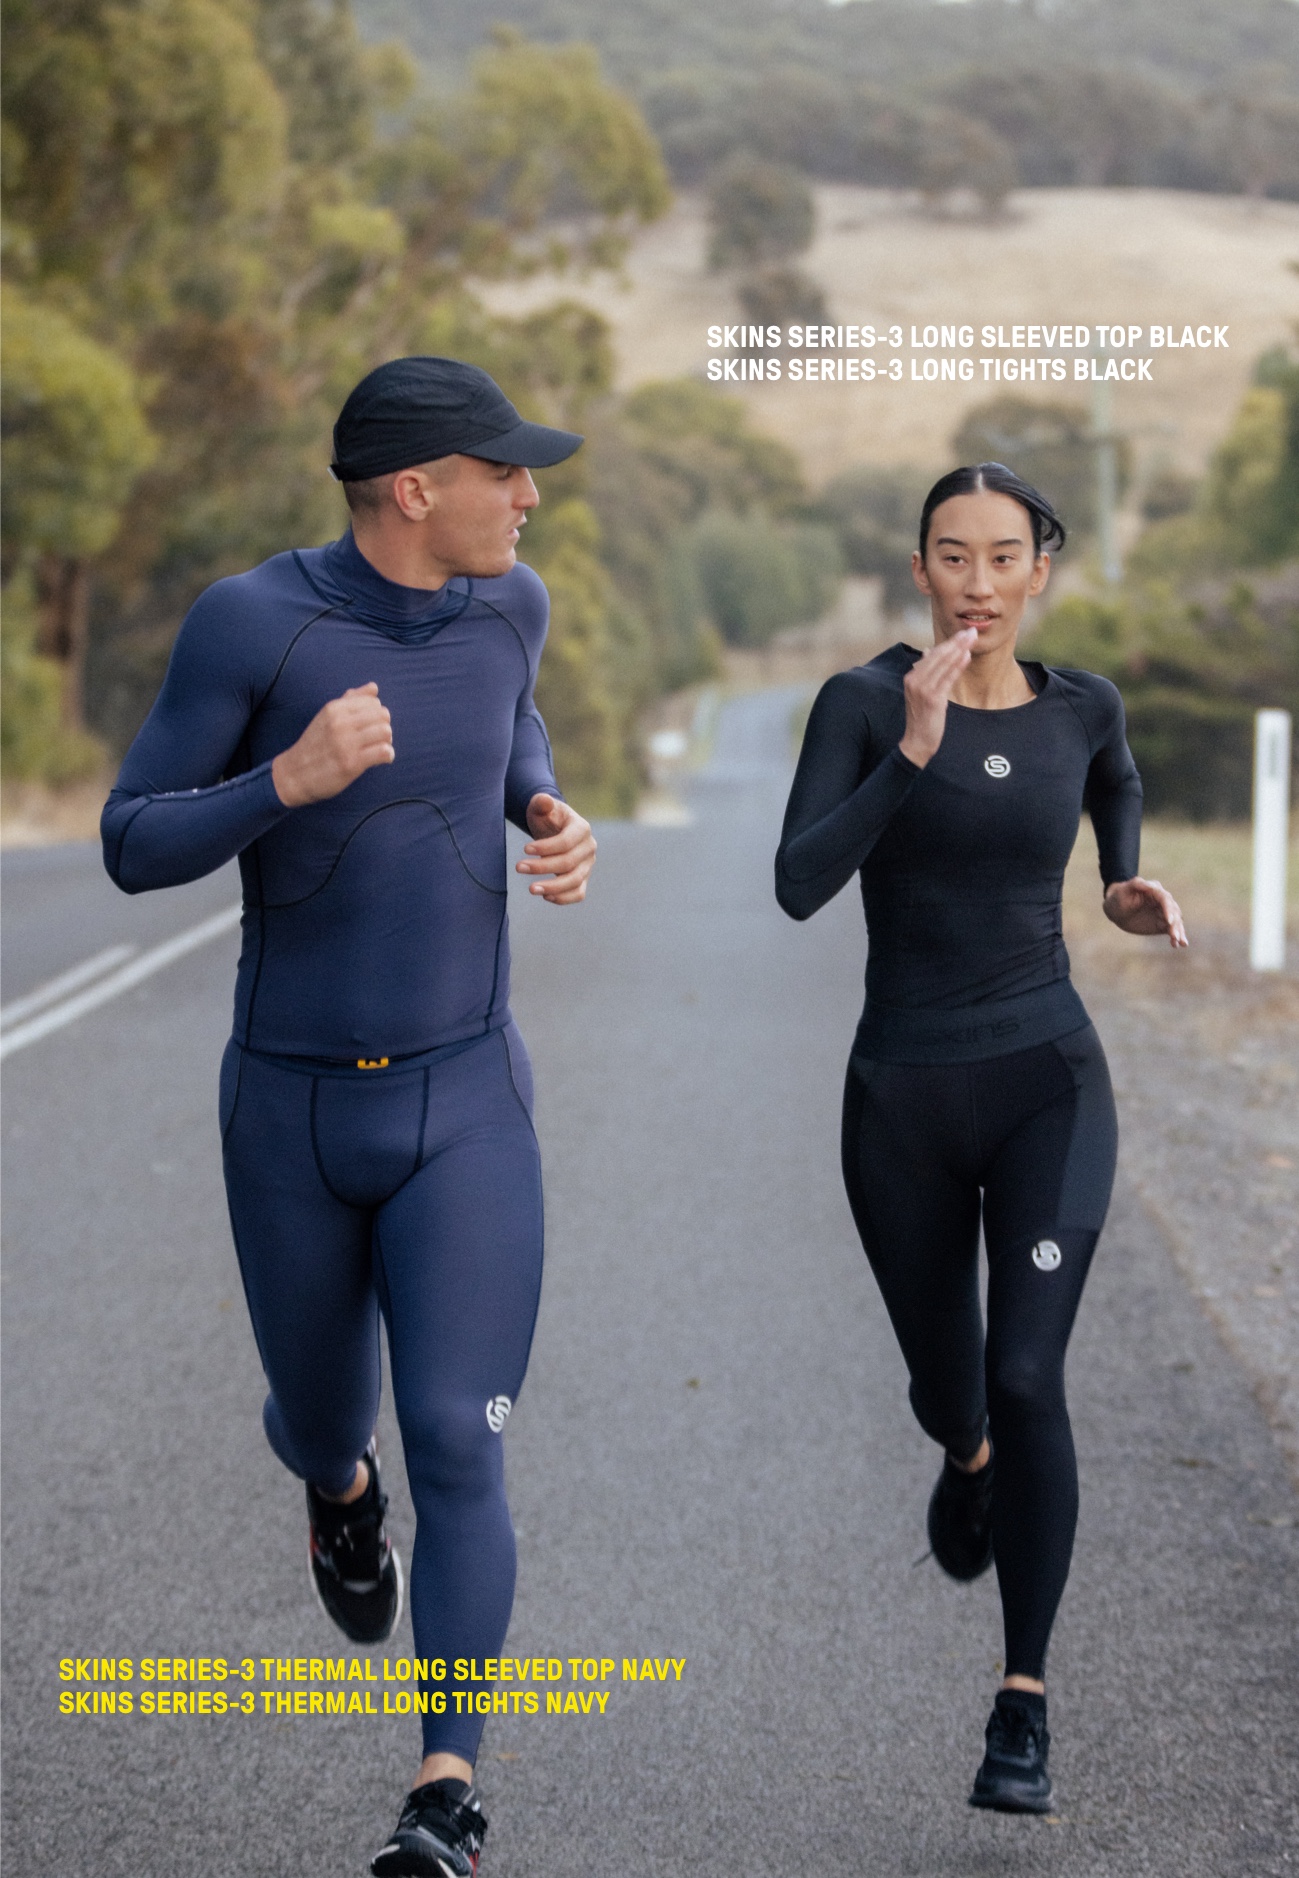 What Kit Should I Wear When Running? - SKINS Compression USA